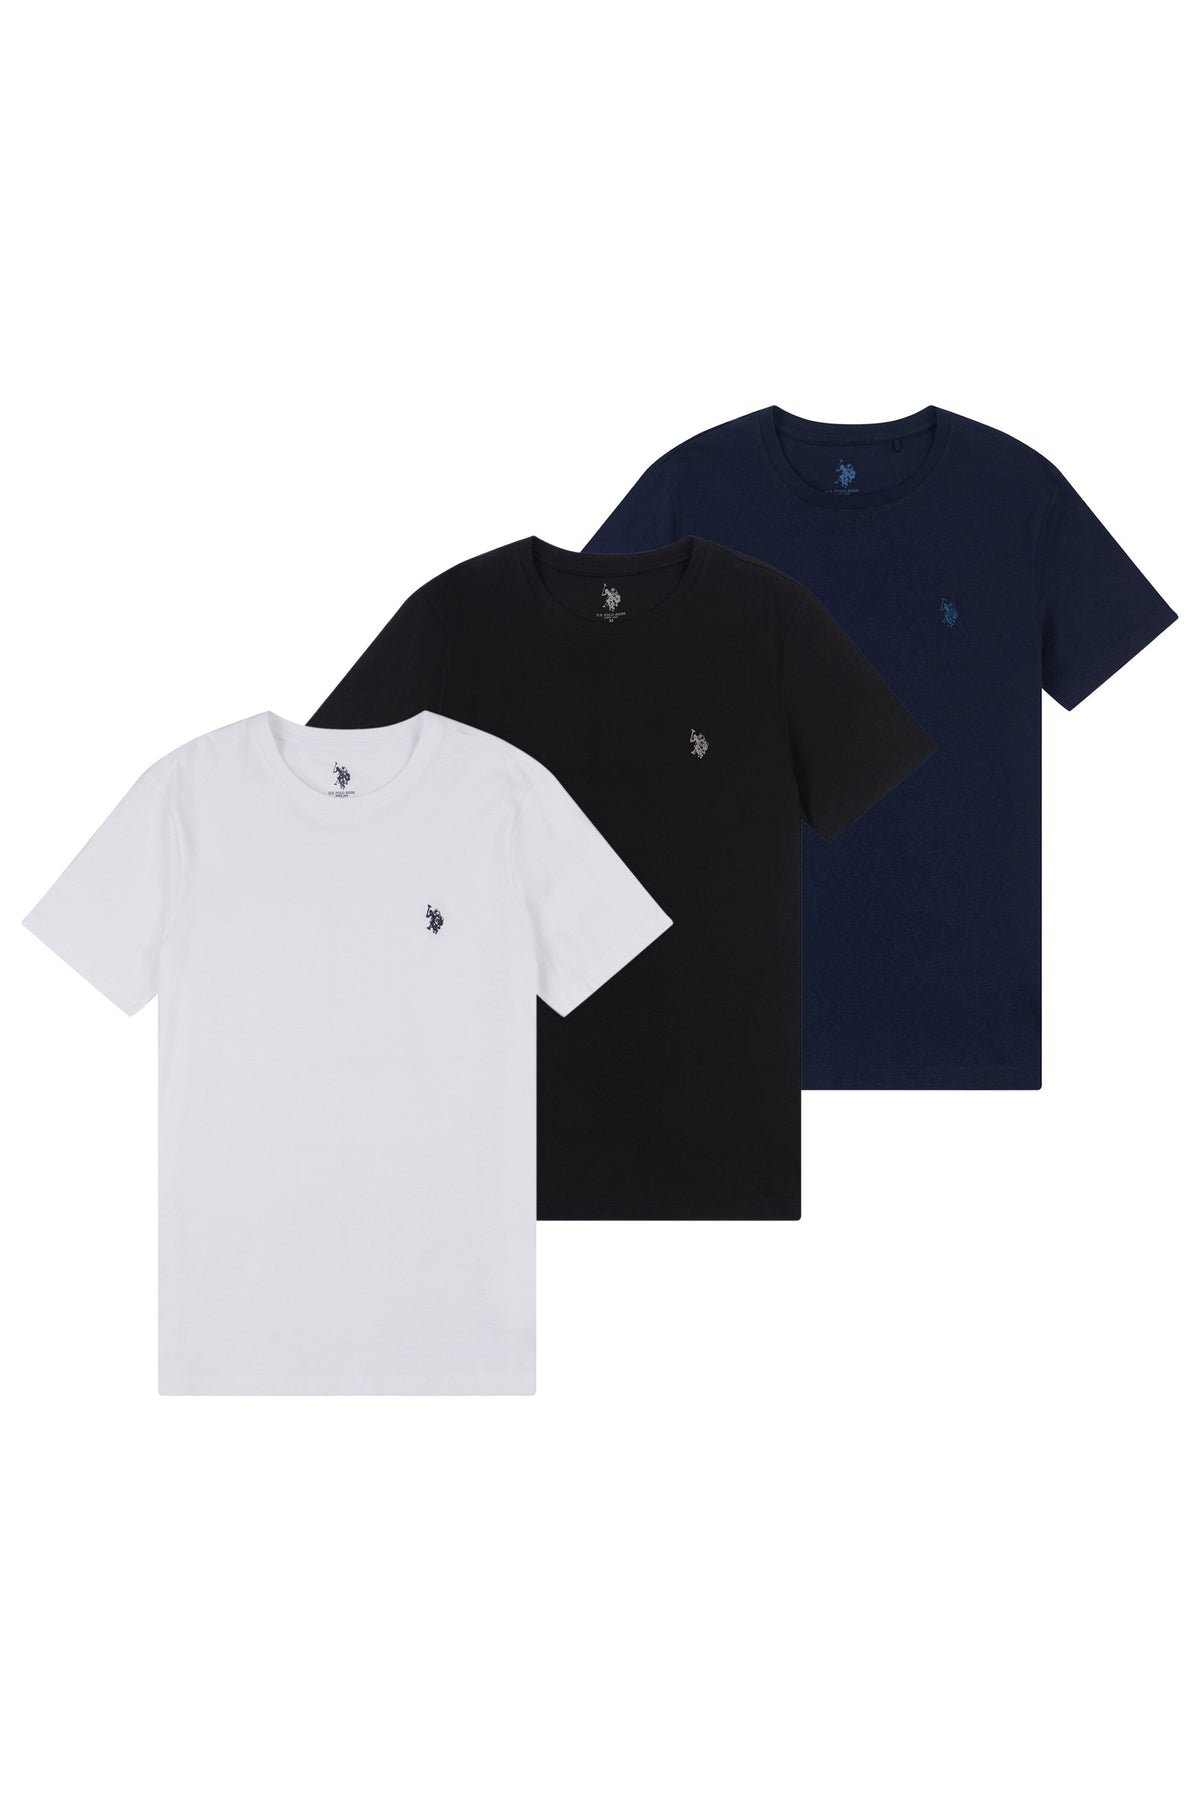 Mens 3 Pack T-Shirts in Navy Blue